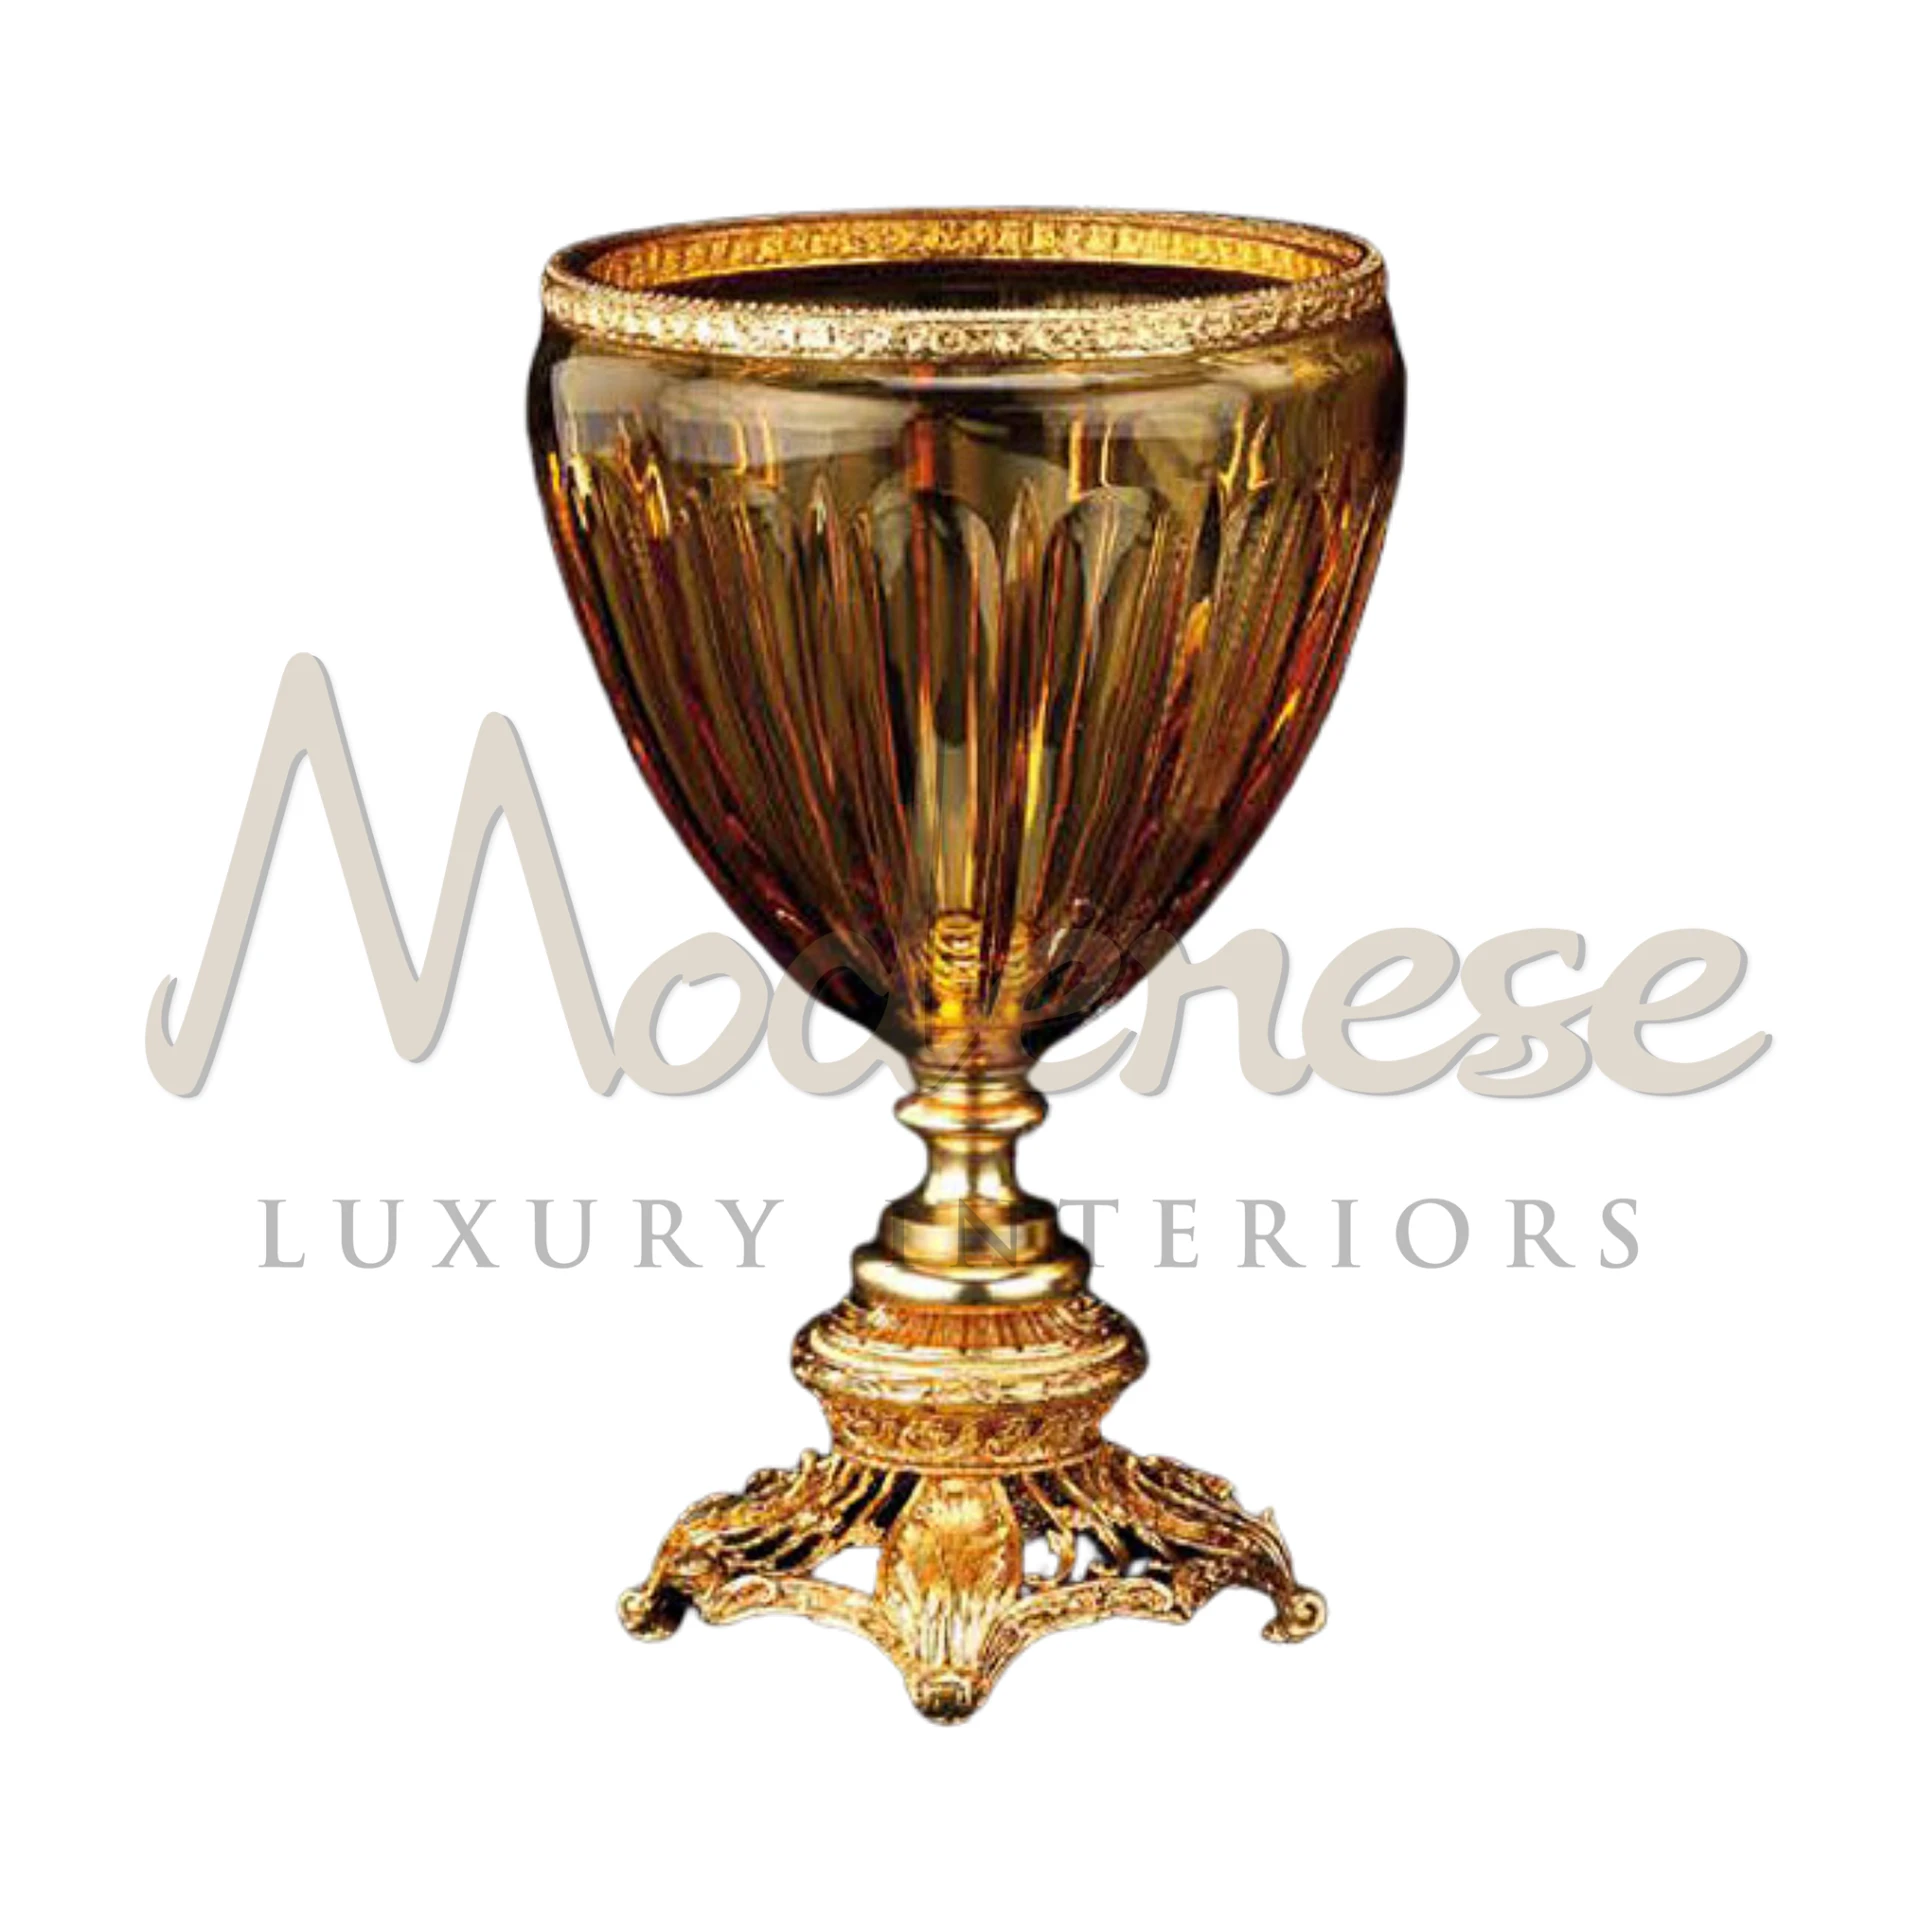 Personalized engraved crystal vase, showcasing artisan skill, perfect for luxury, classic, and baroque interior design aesthetics.